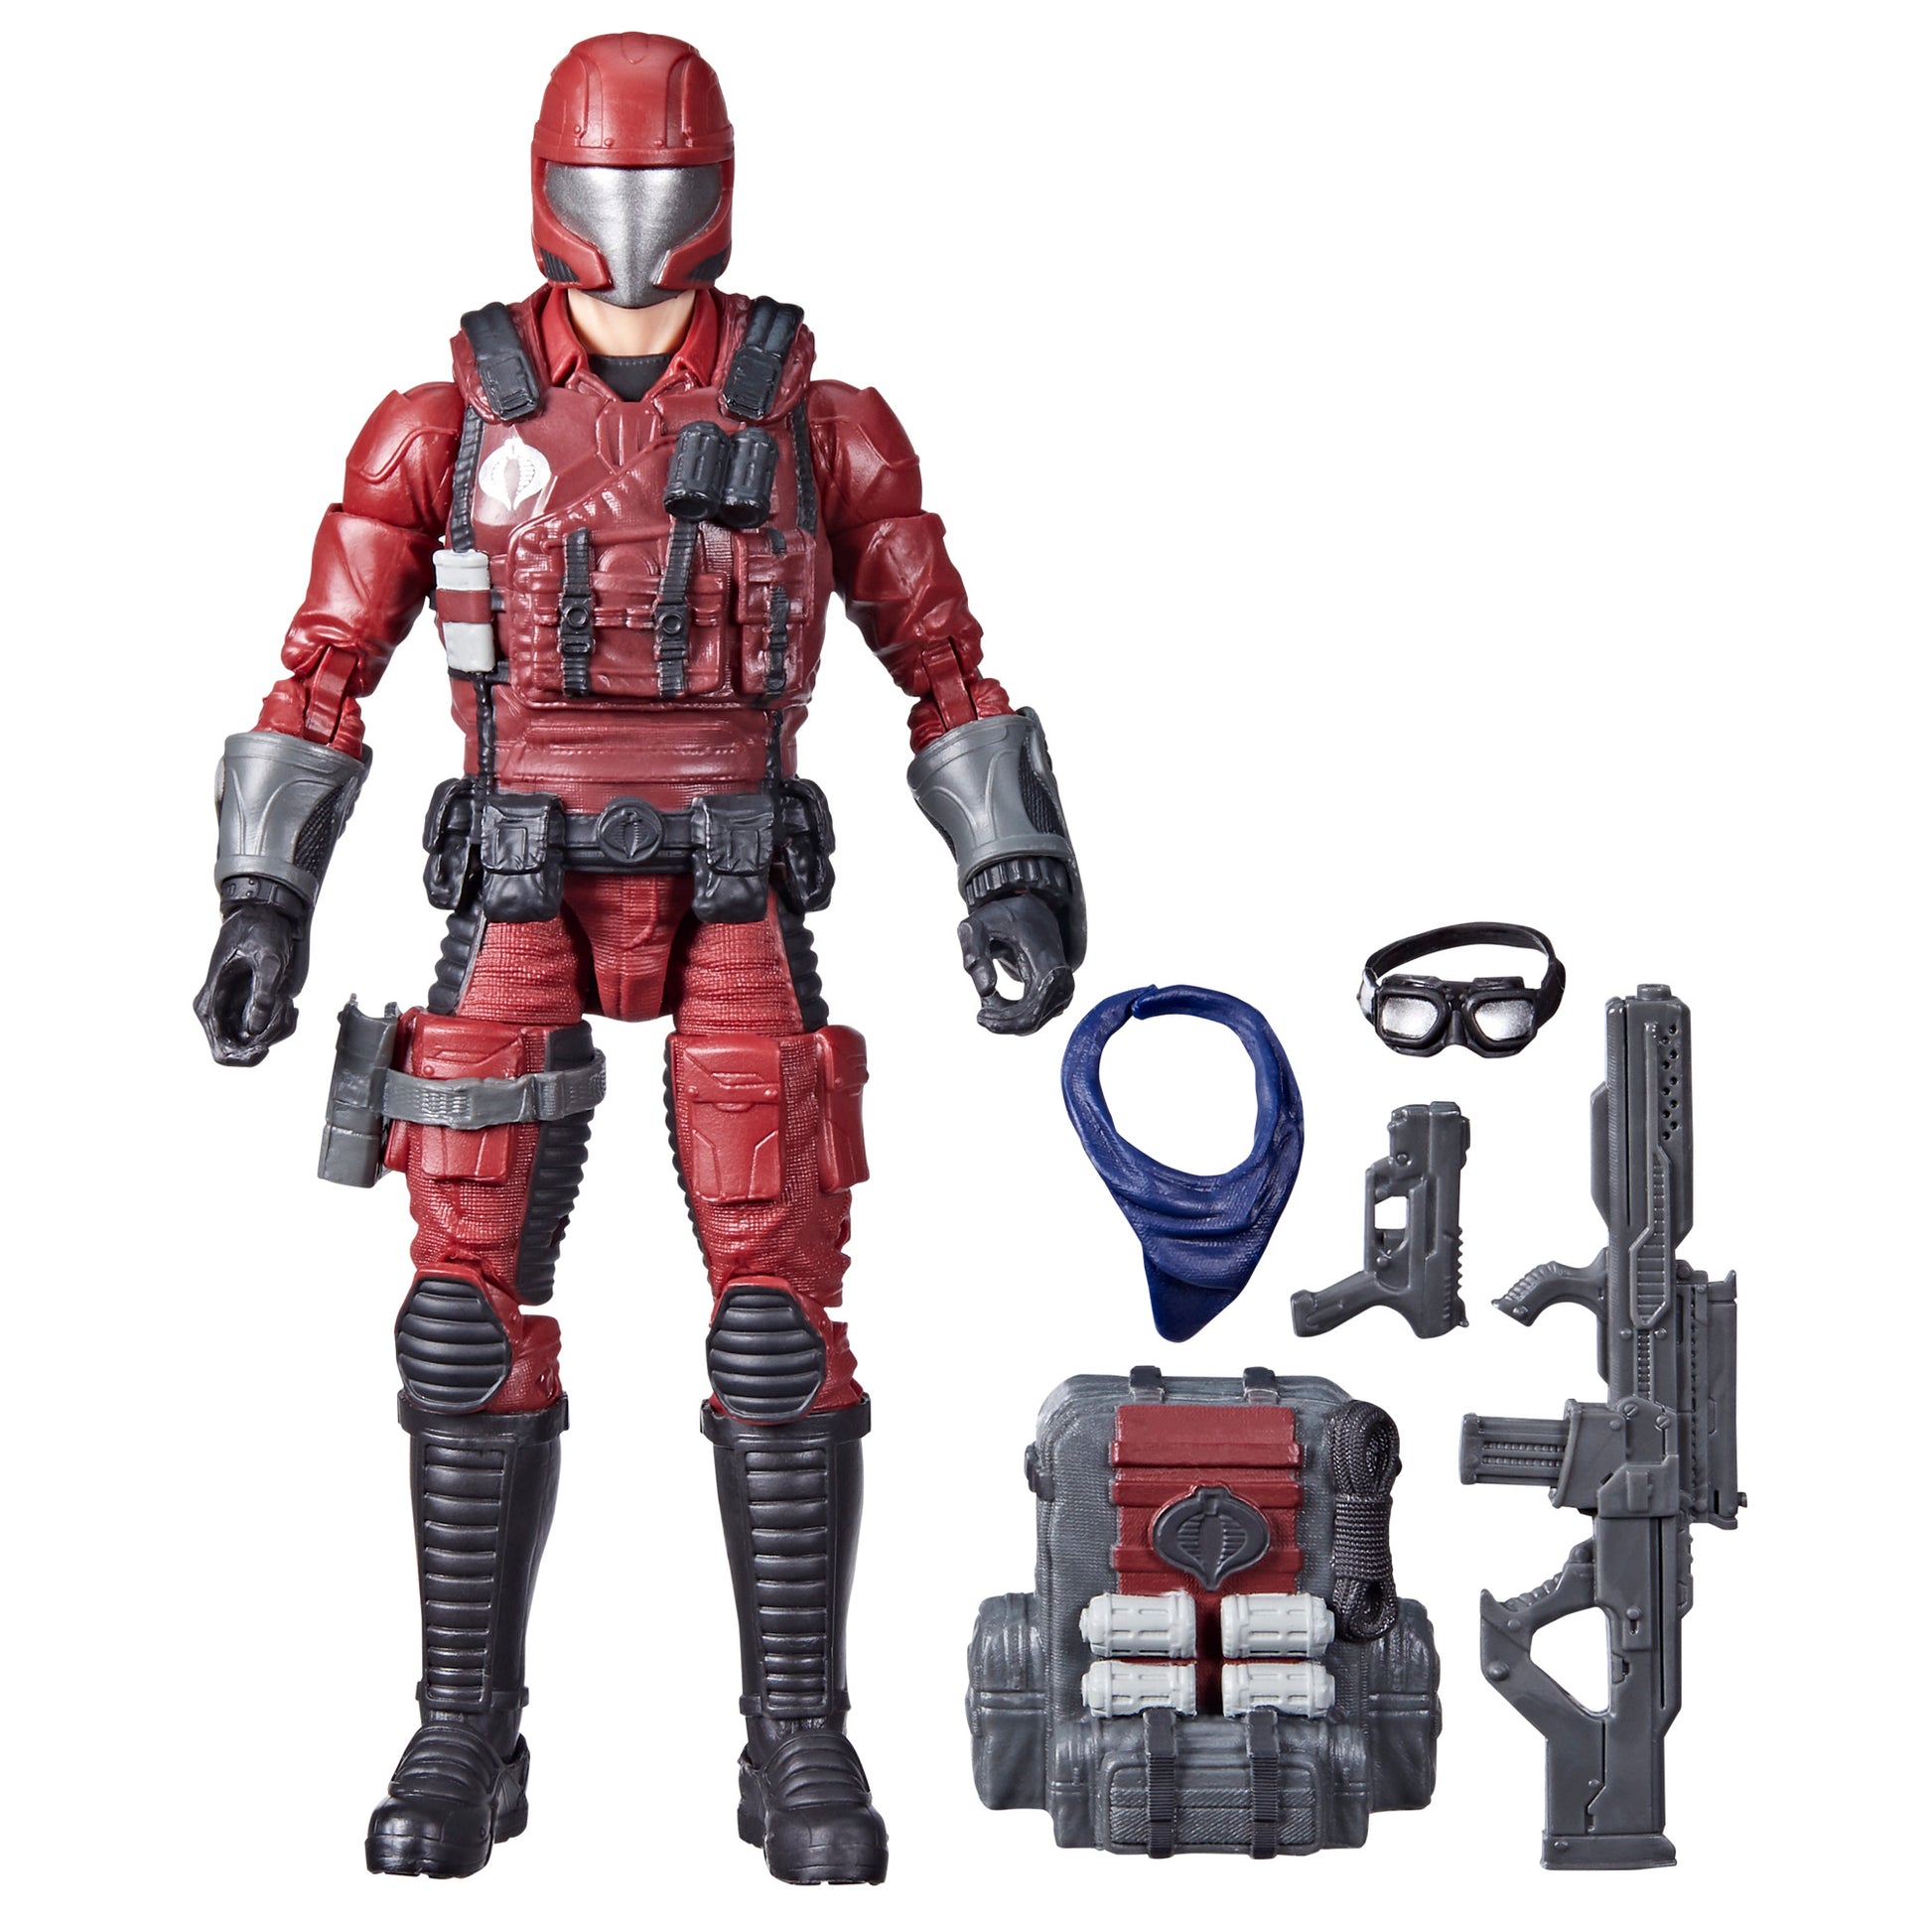 Crimson Viper Action Figure front view with accessories - Heretoserveyou